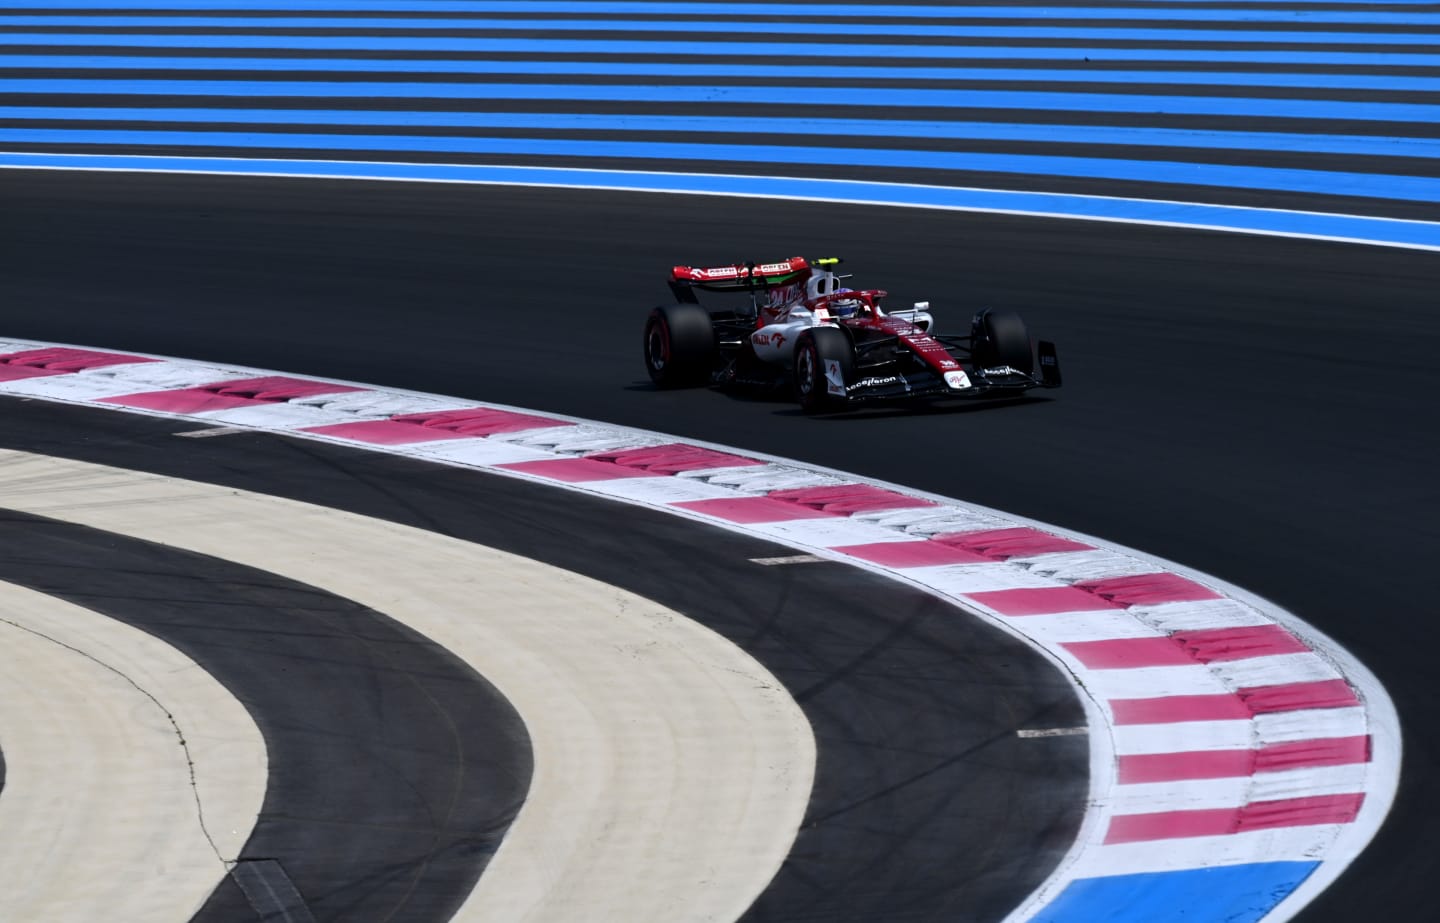 LE CASTELLET, FRANCE - JULY 23: Zhou Guanyu of China driving the (24) Alfa Romeo F1 C42 Ferrari on track during final practice ahead of the F1 Grand Prix of France at Circuit Paul Ricard on July 23, 2022 in Le Castellet, France. (Photo by Dan Mullan/Getty Images)